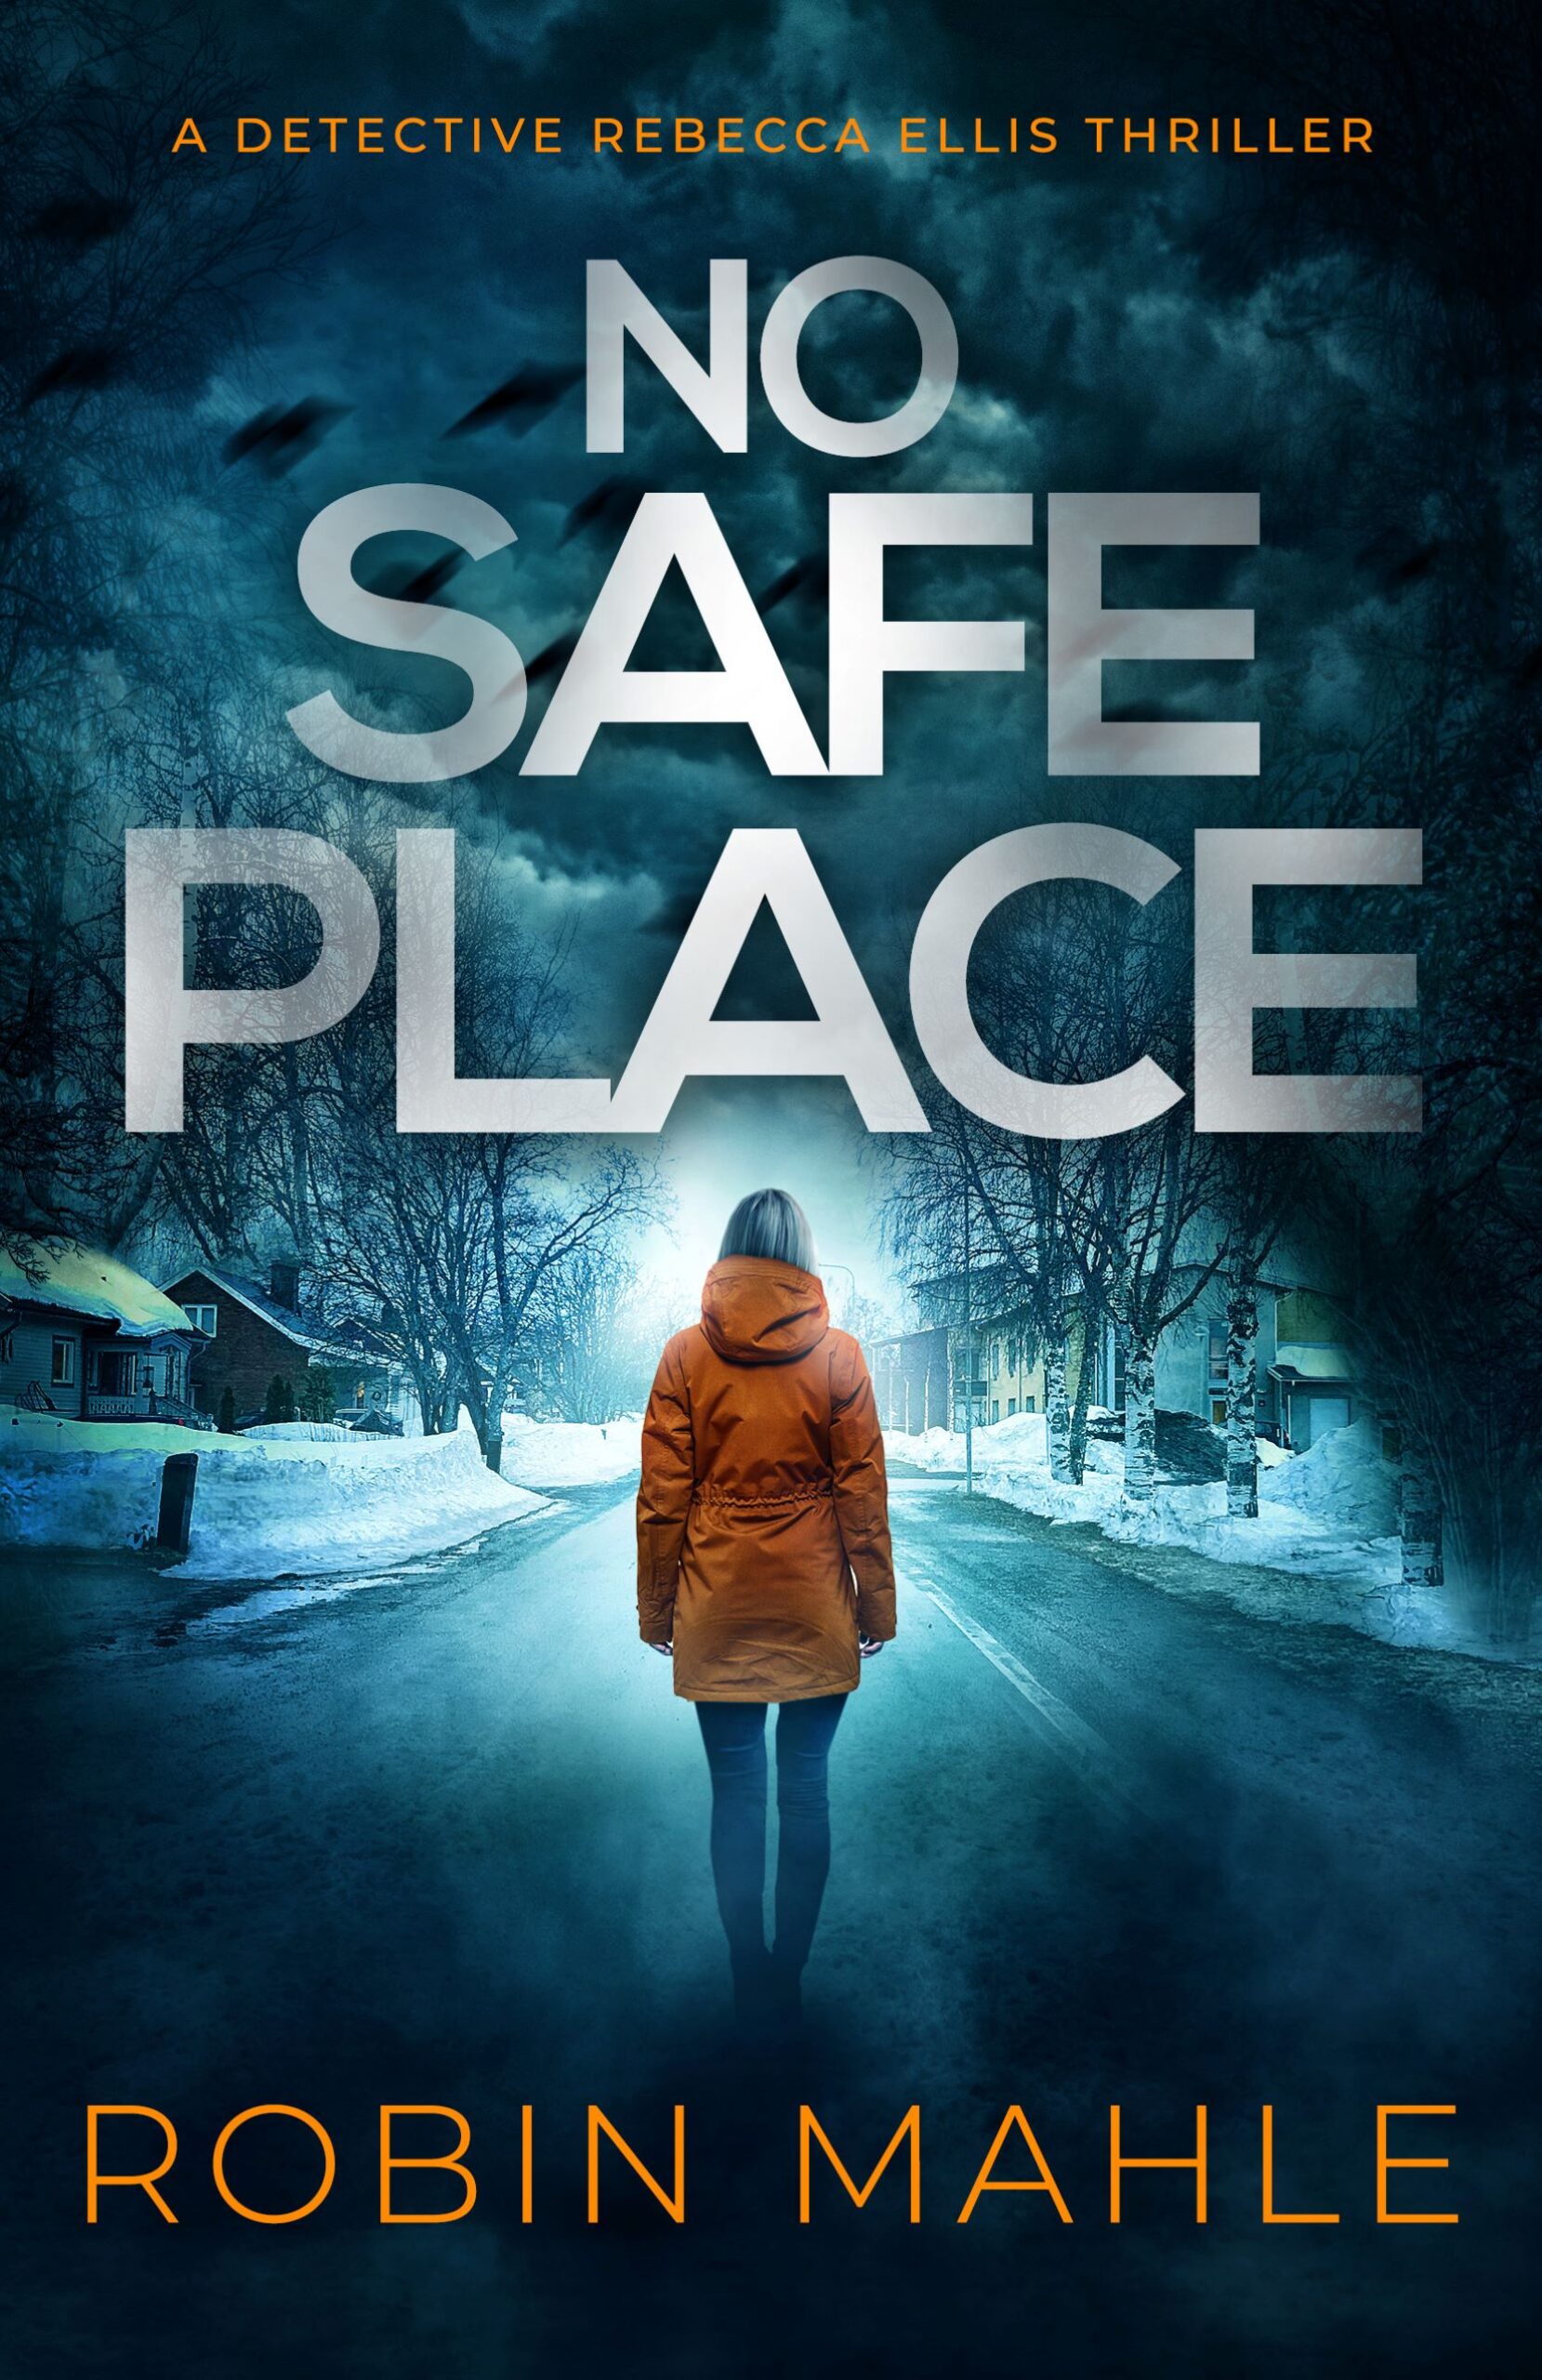 ROBIN MAHLE NEW RELEASE – NO SAFE PLACE